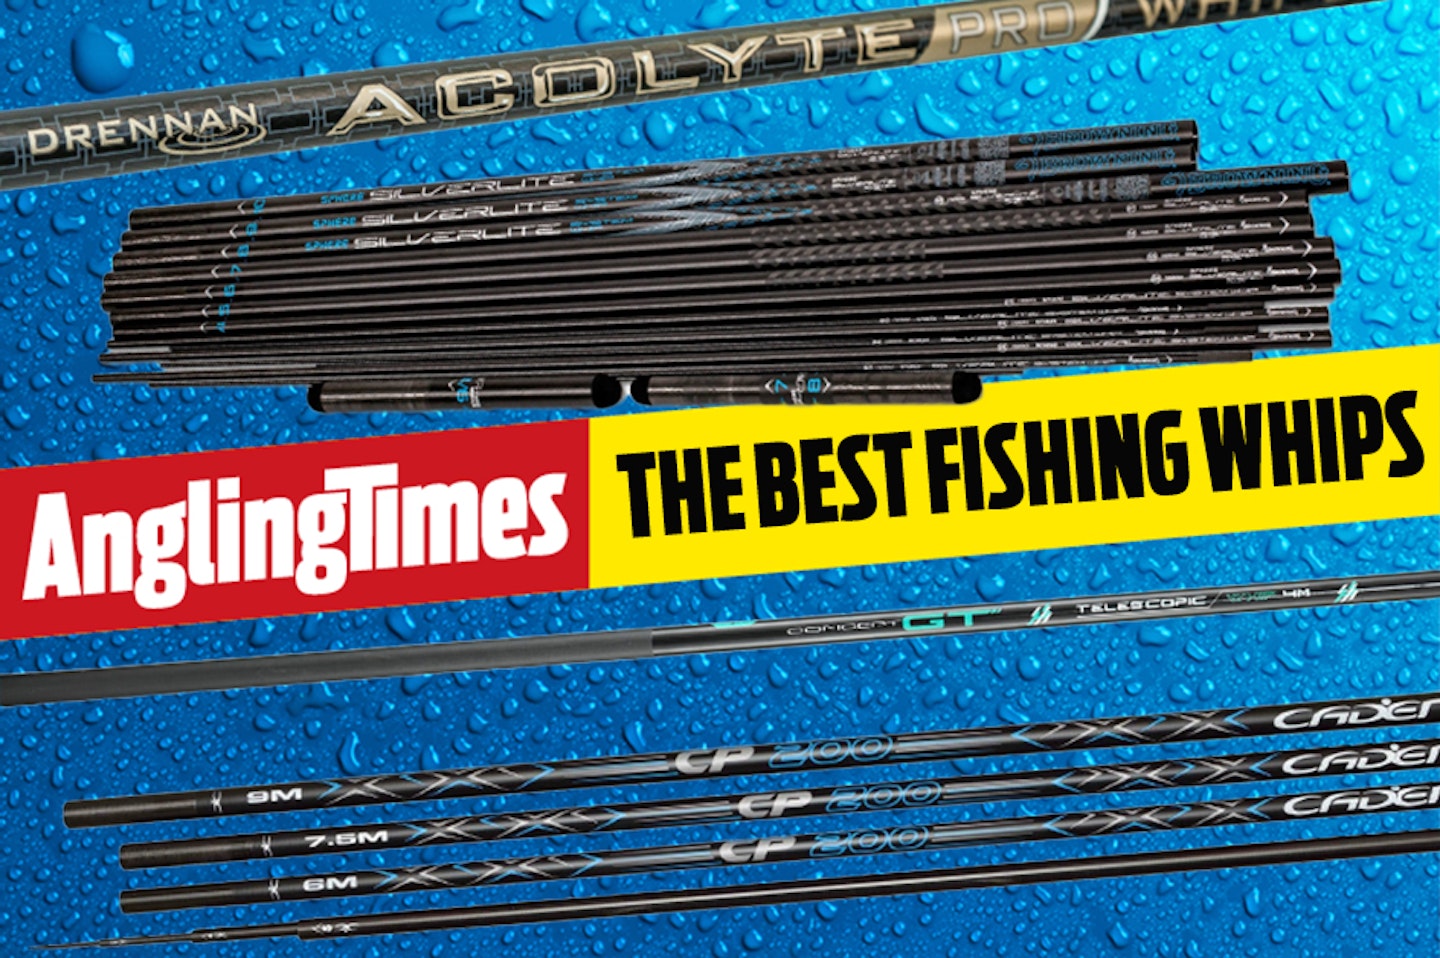 The best fishing whips for all budgets